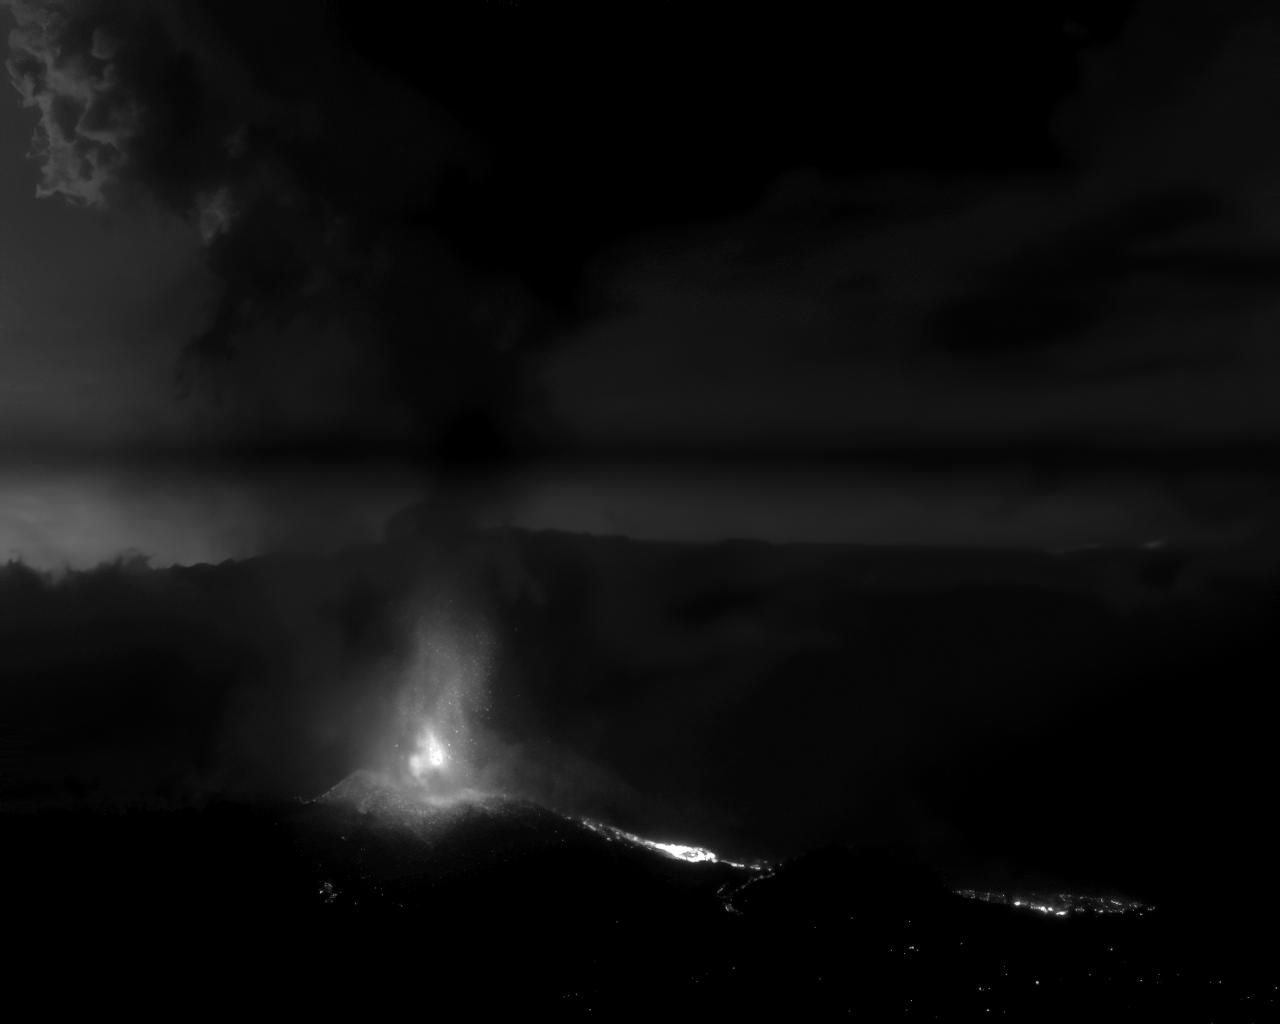 Image taken from La Palma, with the DRAGO instrument, using the observation bands known as shortwave infrared or SWIR